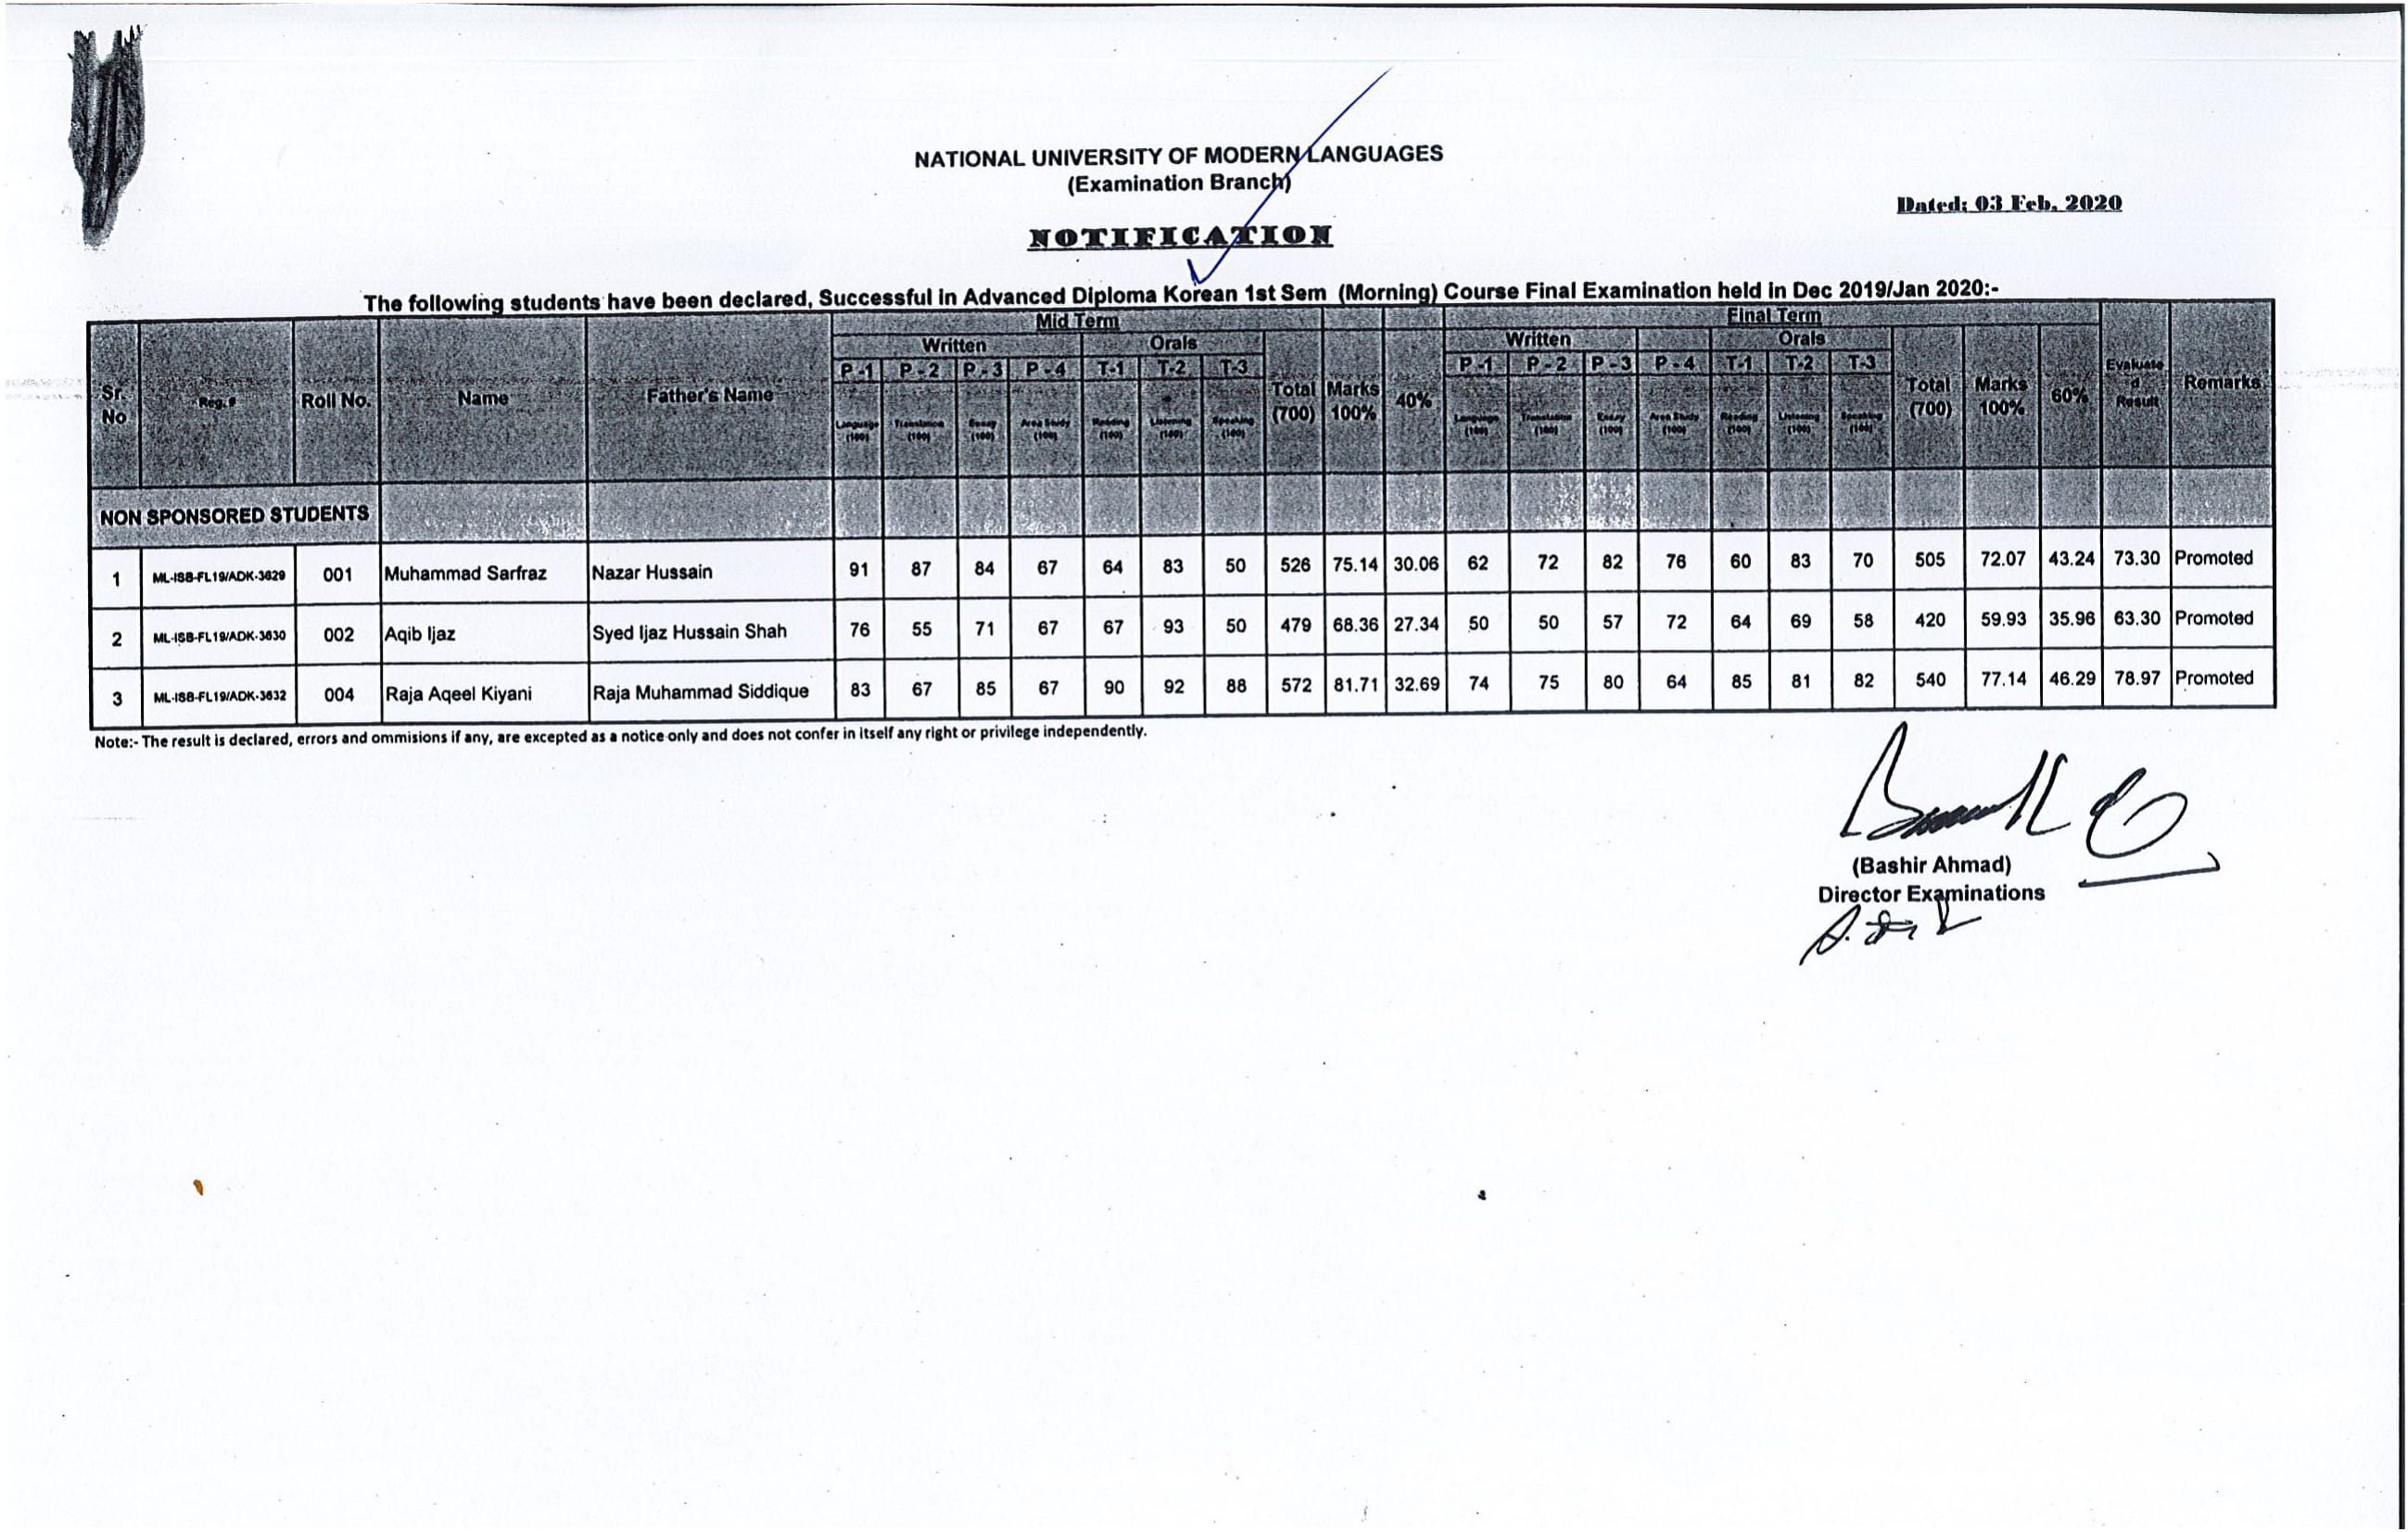 RESULT OF ADVANCE DIPLOMA - II (MORNING)